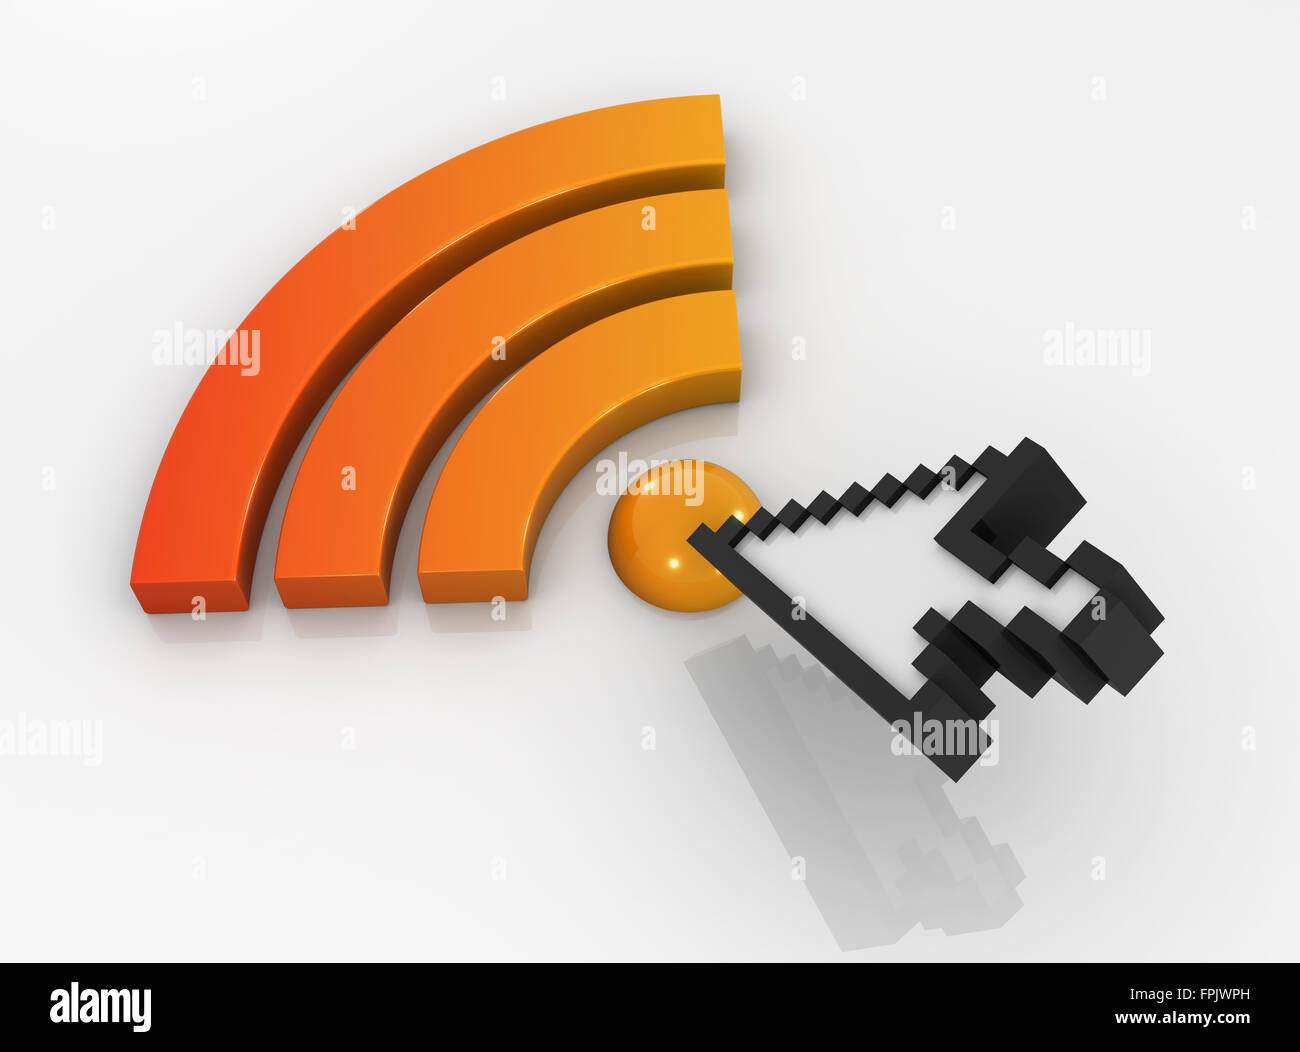 Rss icon and cursor , 3d rendered image. Stock Photo